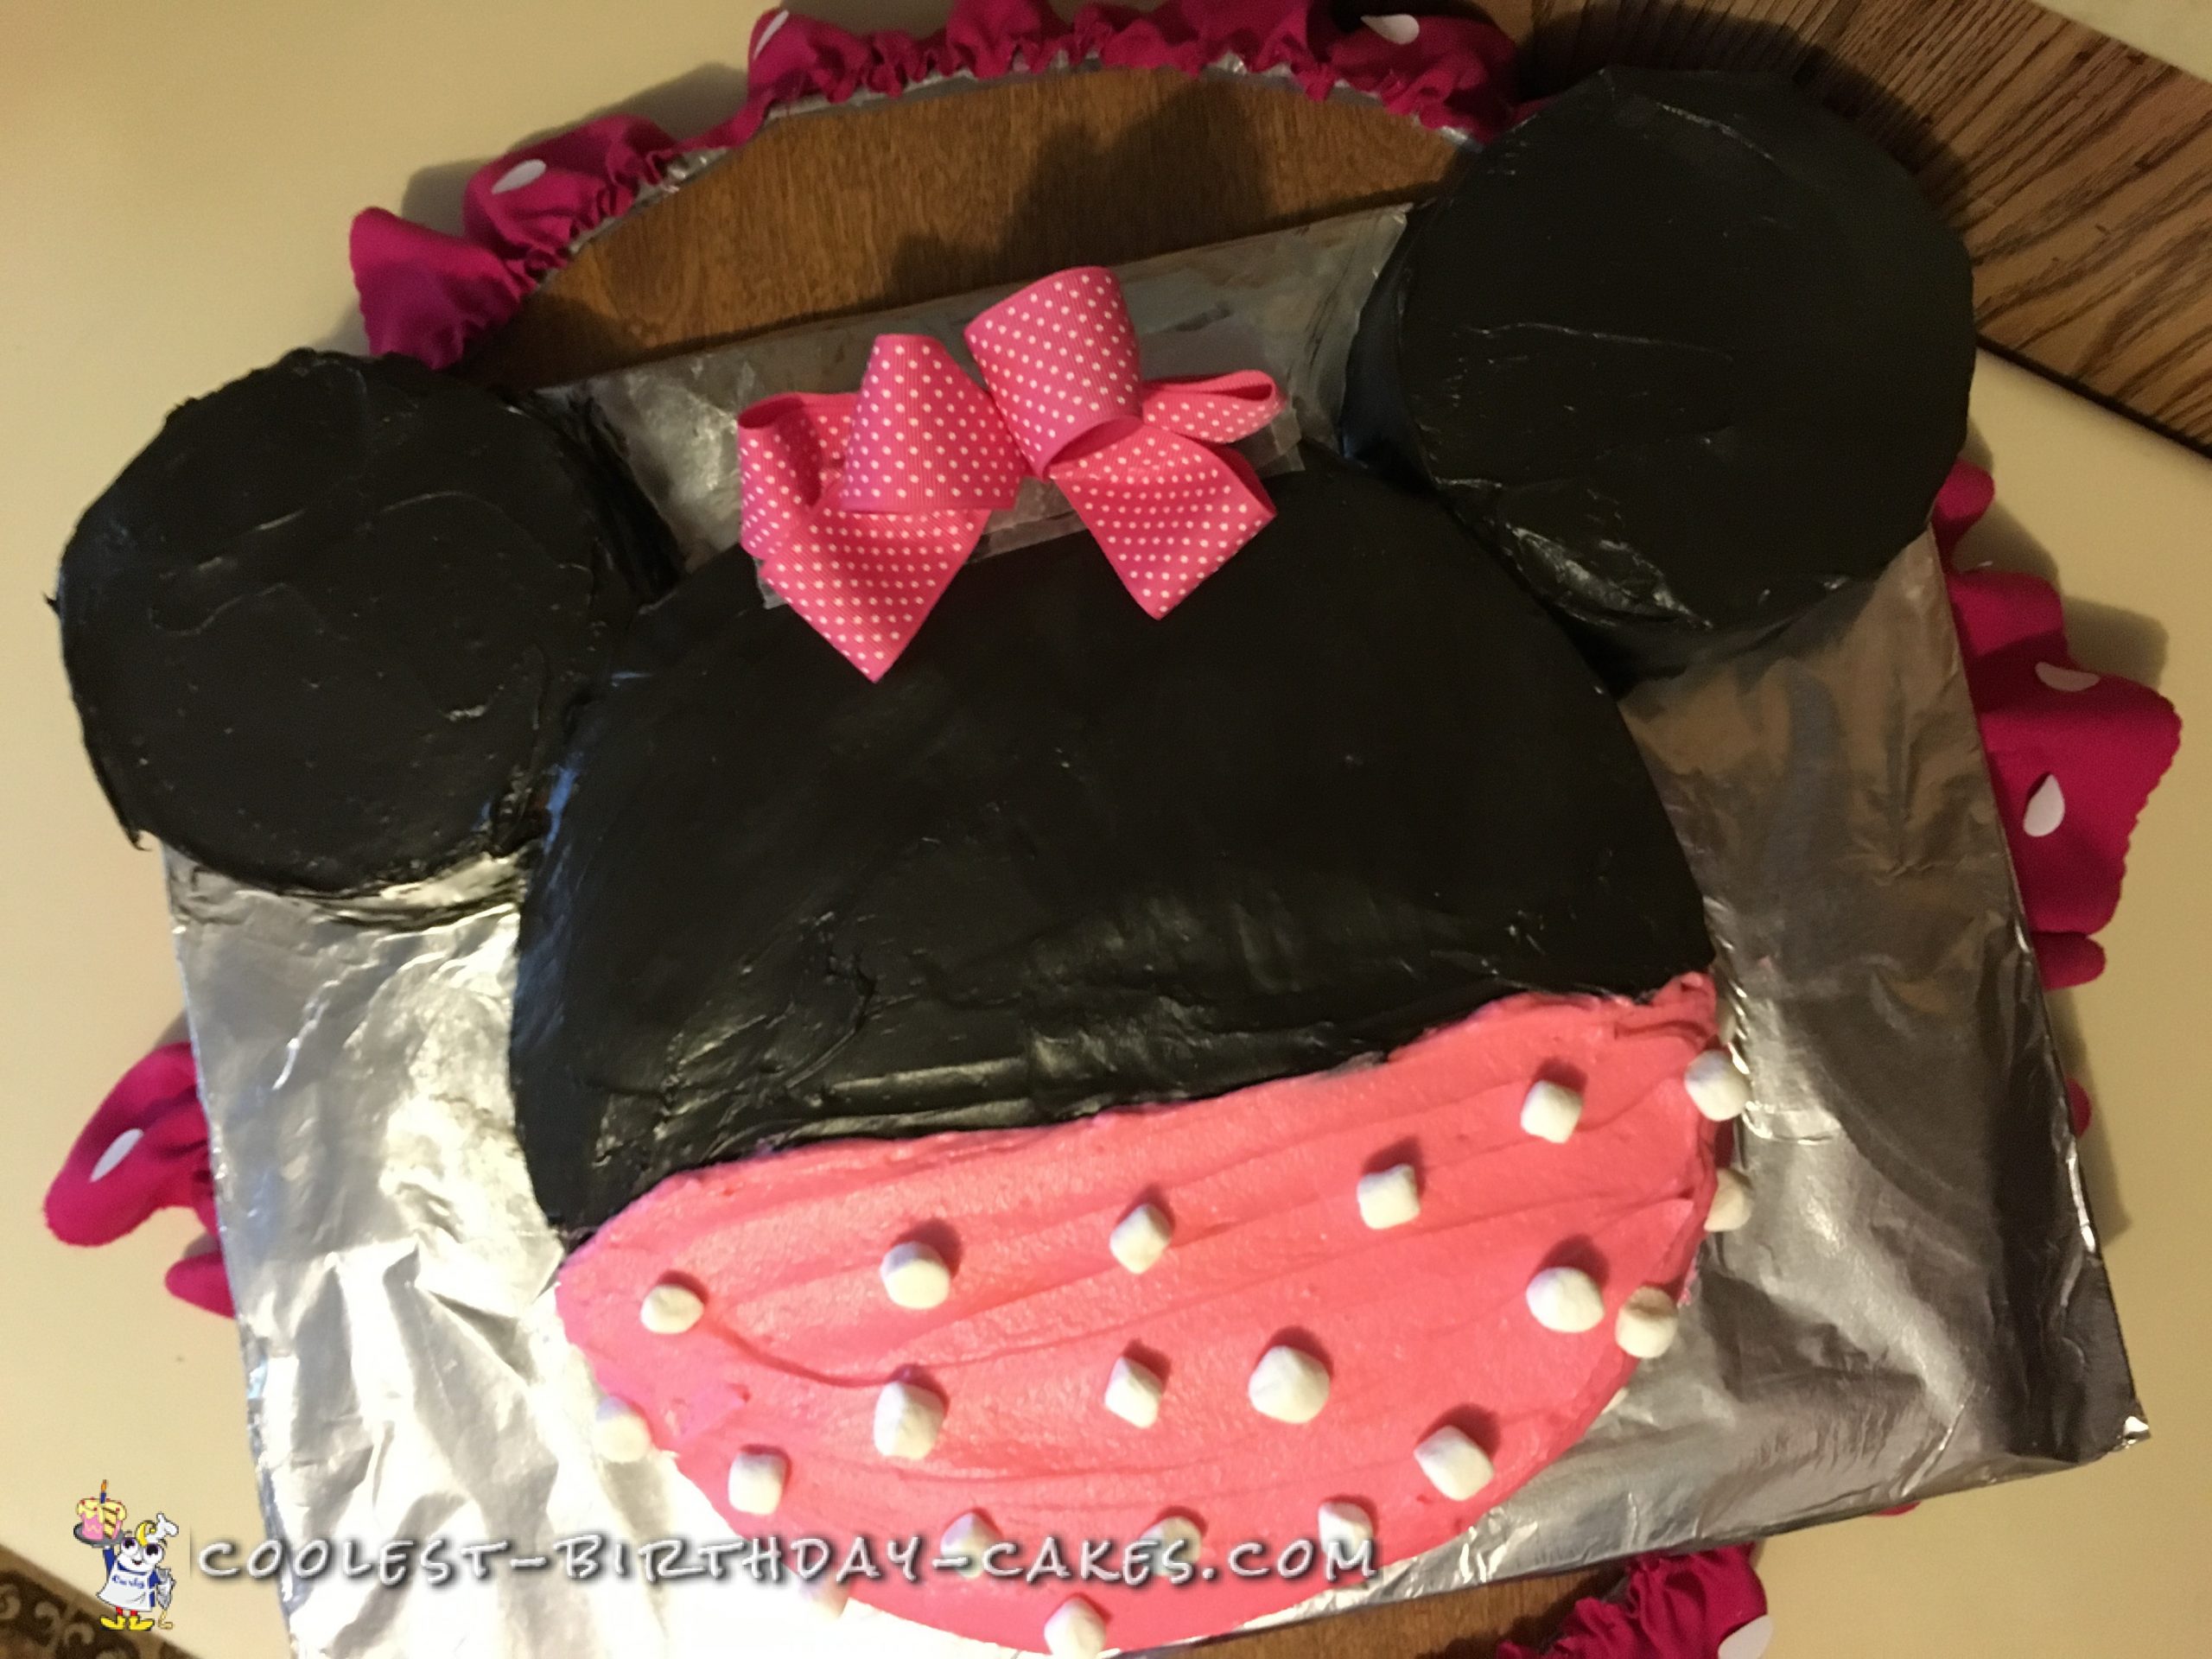 Cool Minnie Mouse Cake